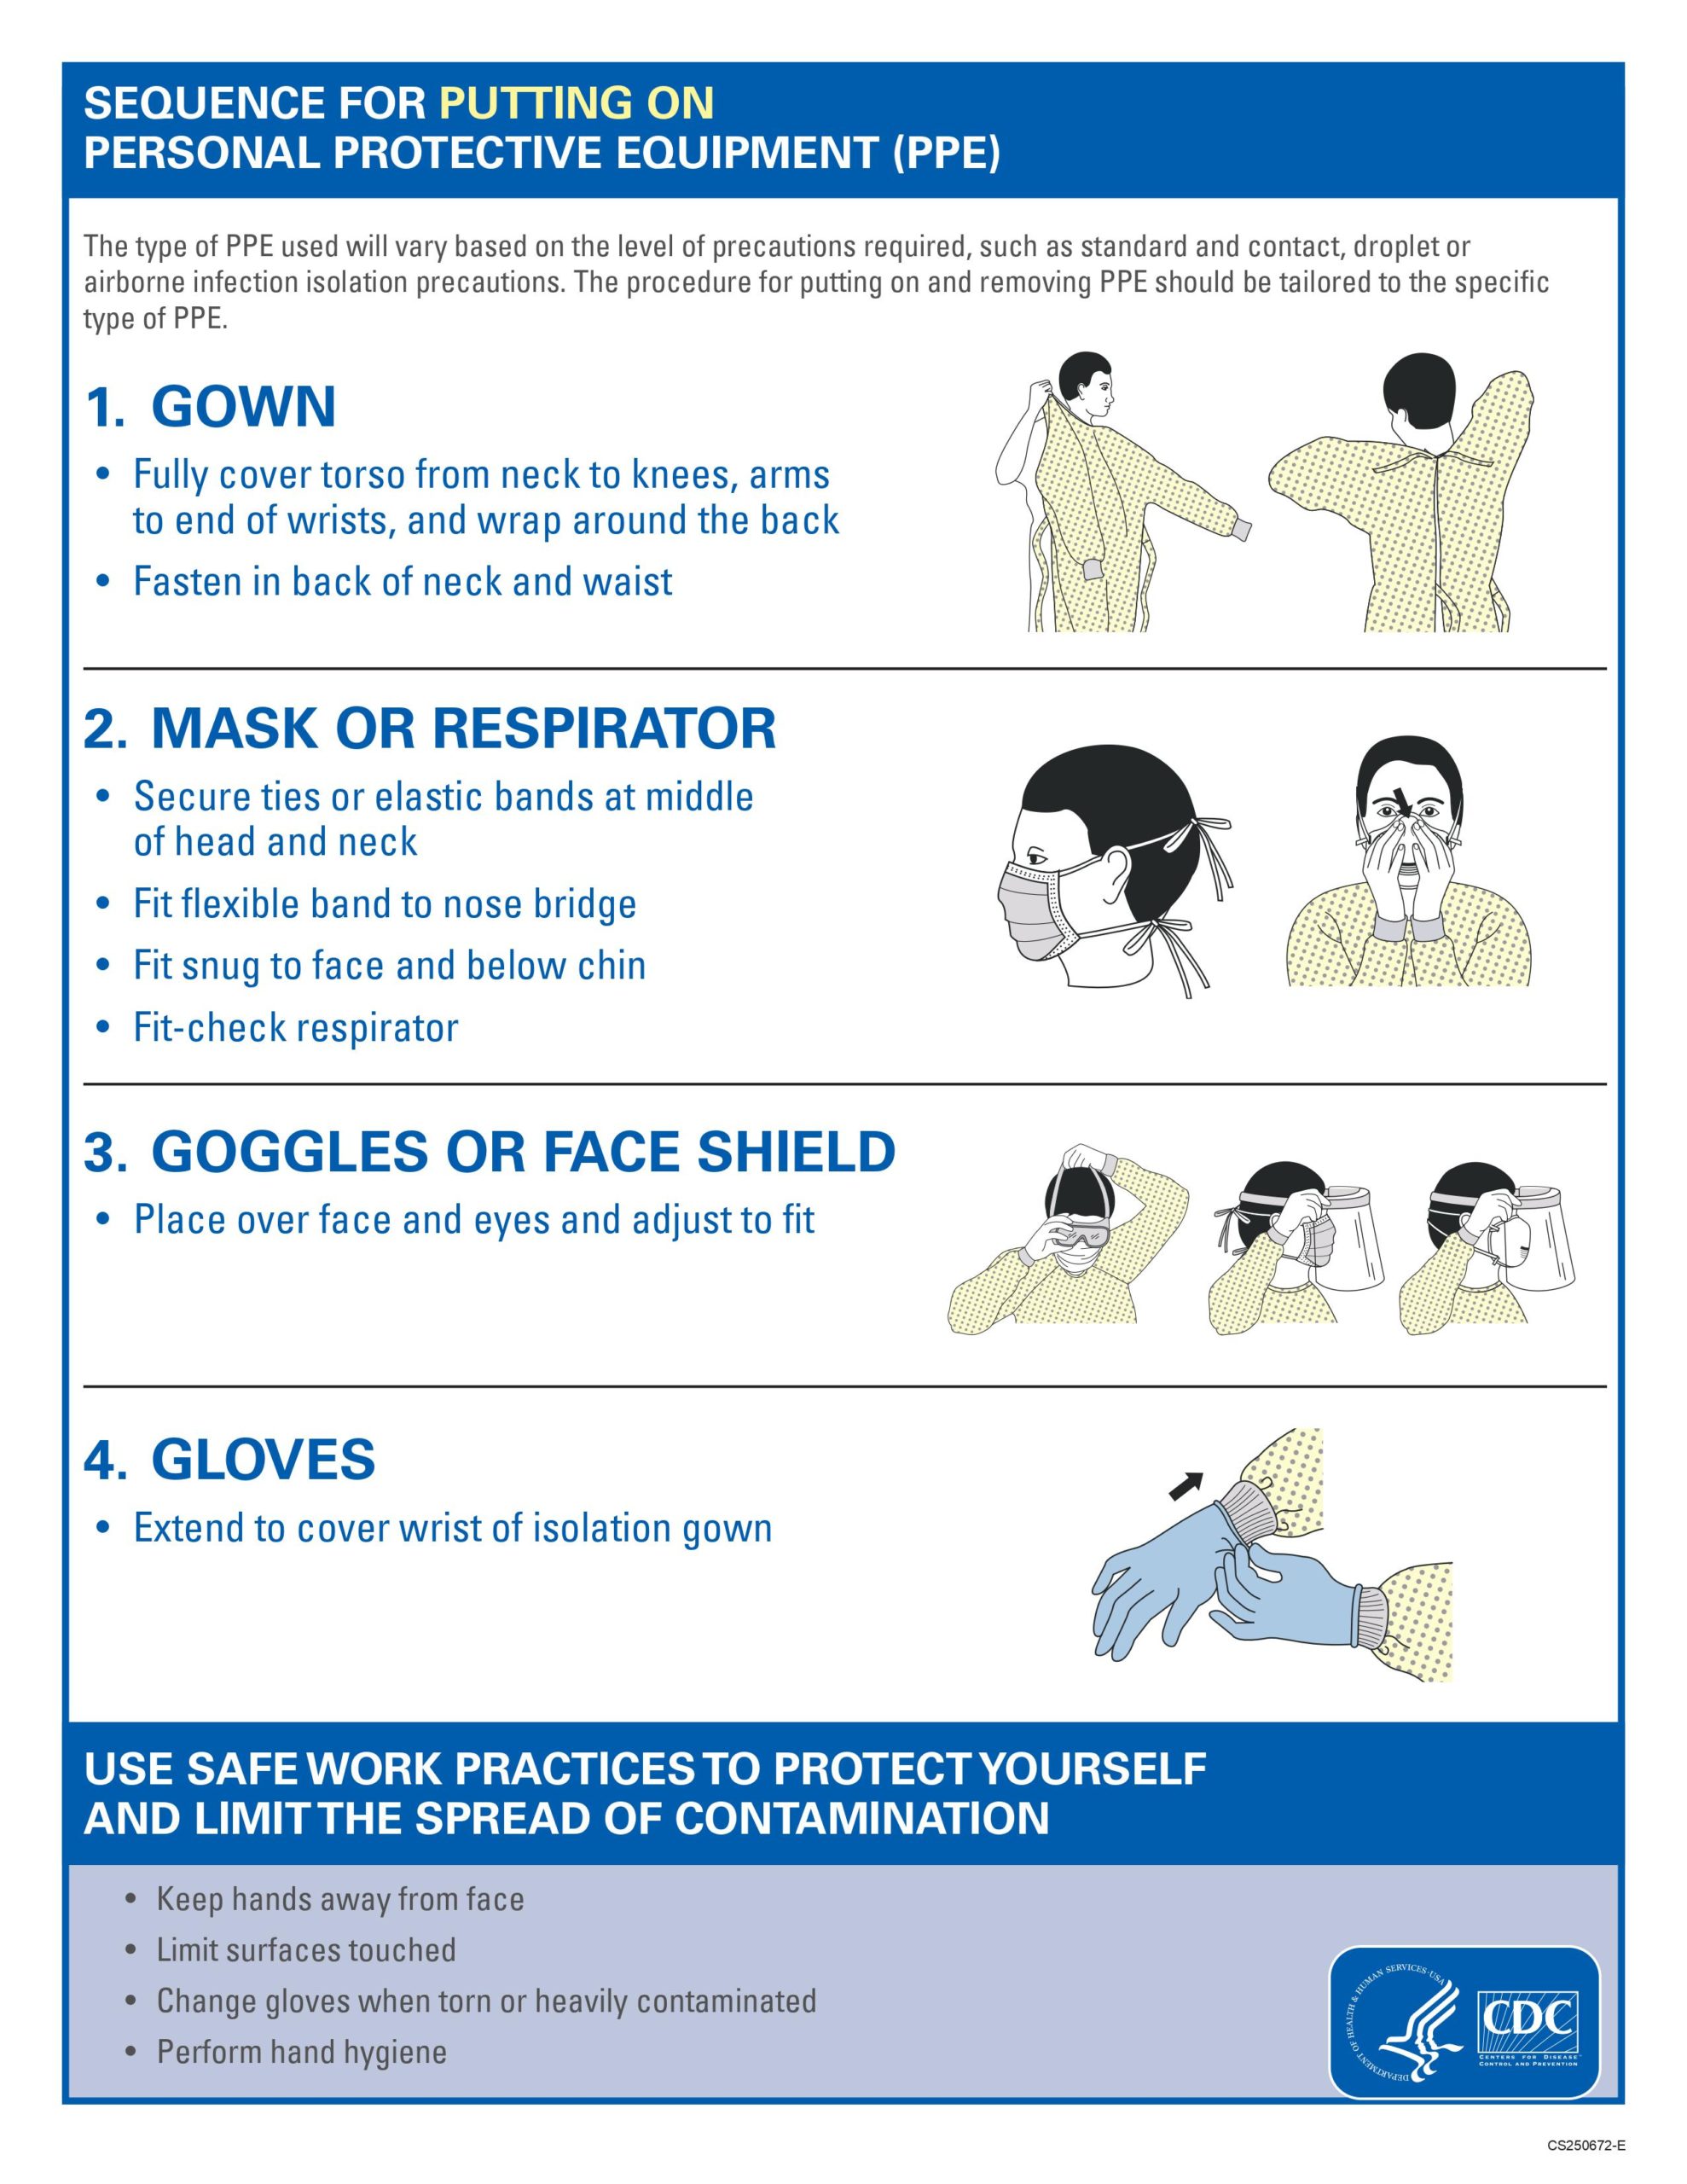 SEQUENCE FOR PUTTING ON PERSONAL PROTECTIVE EQUIPMENT (PPE) CDC